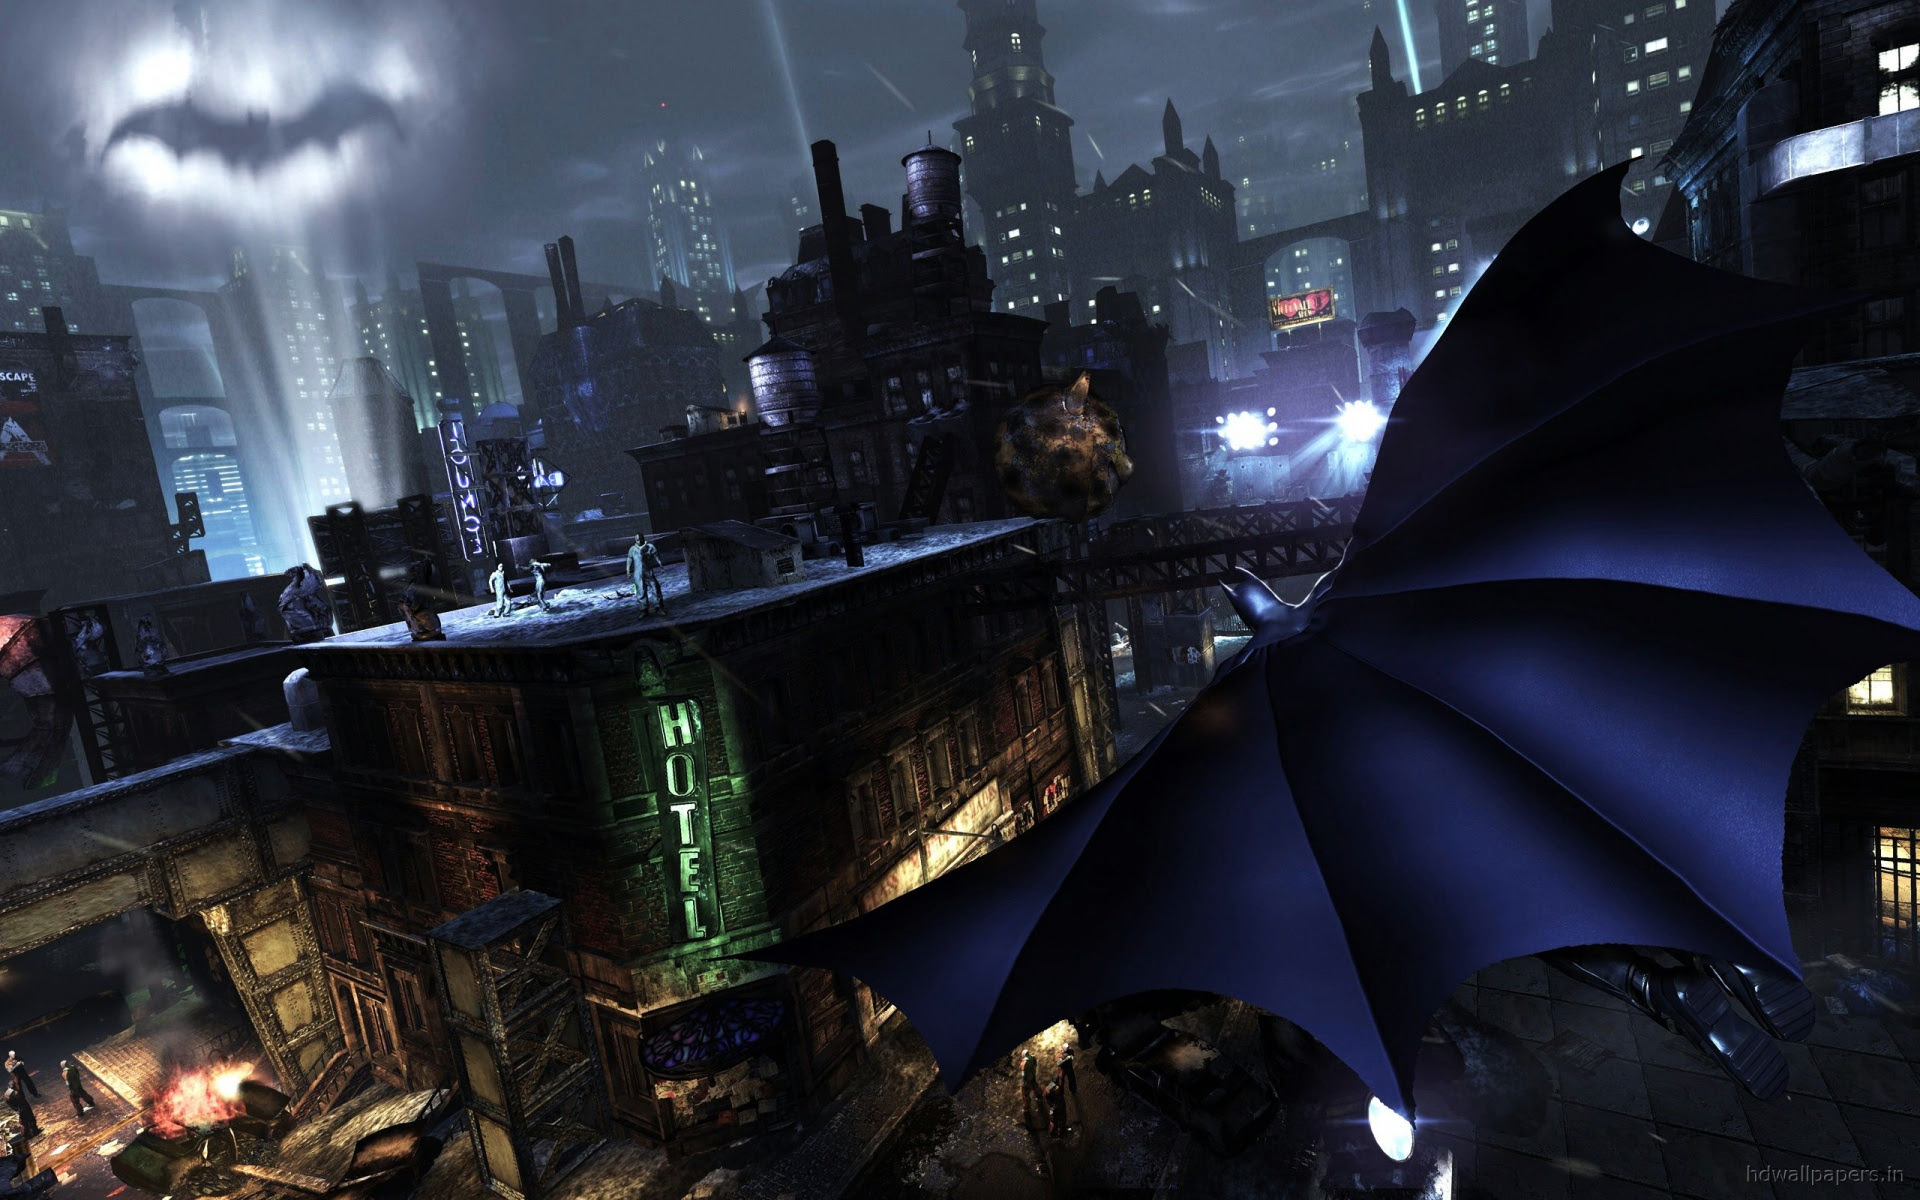 Arkham asylum, sending players soaring into arkham city, the new maximum security home for all of gotham city's thugs, gangsters and insane criminal masterminds. Batman Arkham City Wallpapers In Jpg Format For Free Download